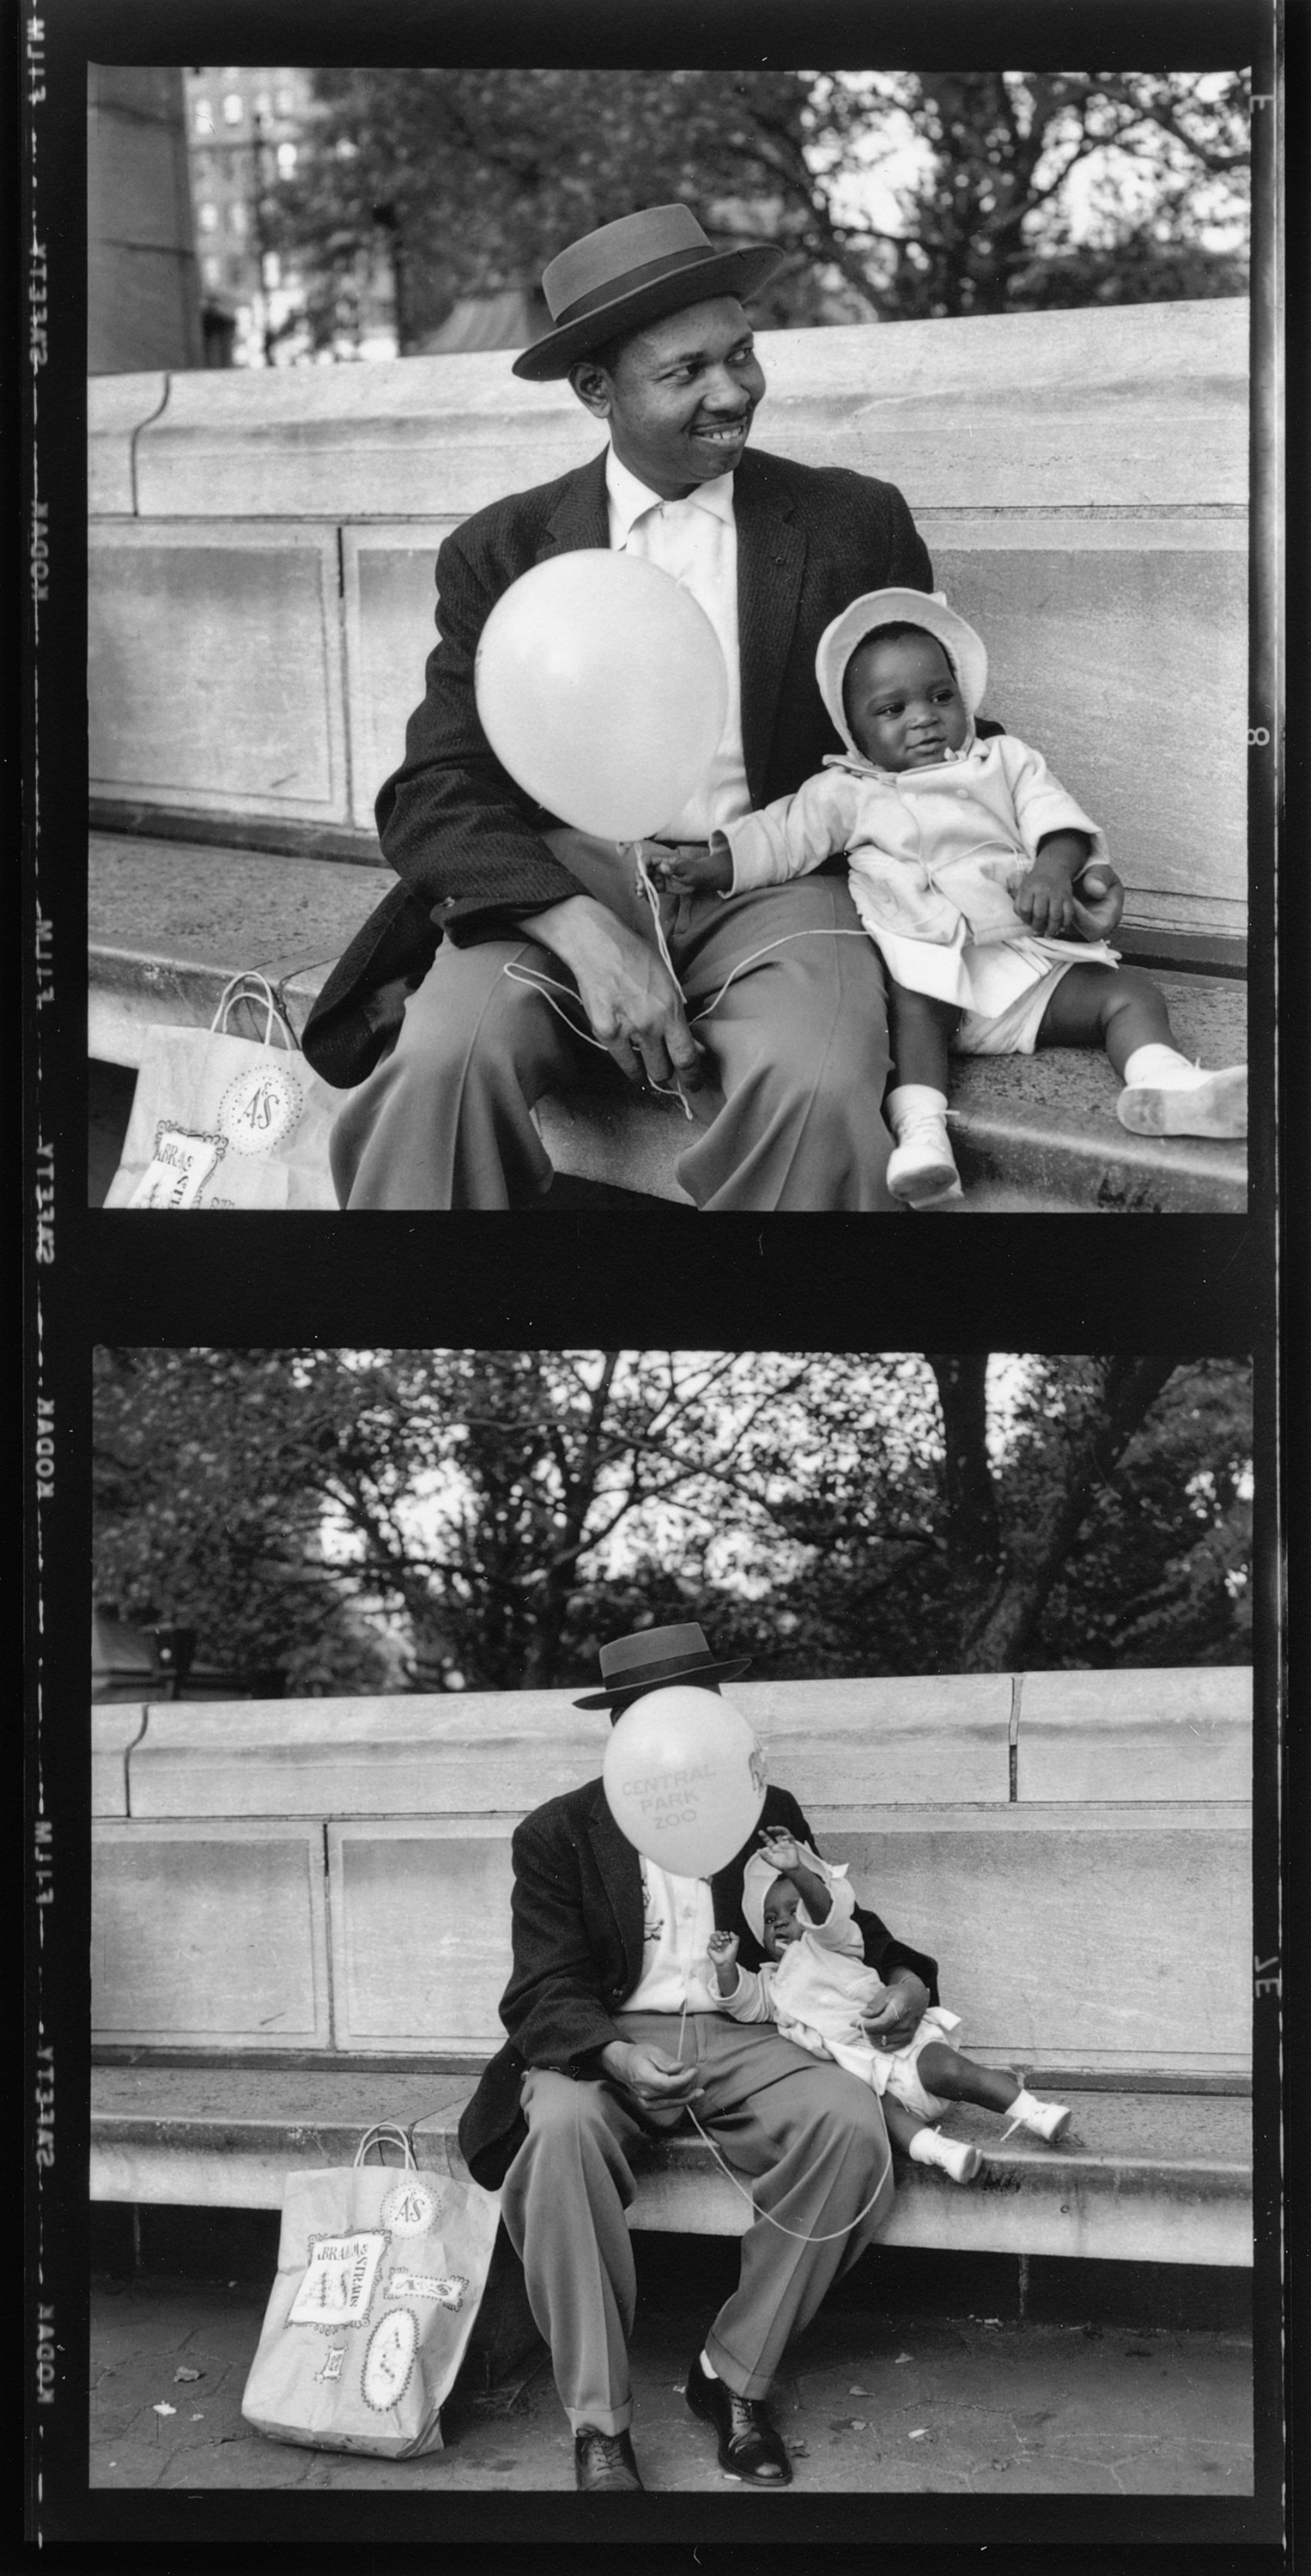 A man holds a baby and a balloon.